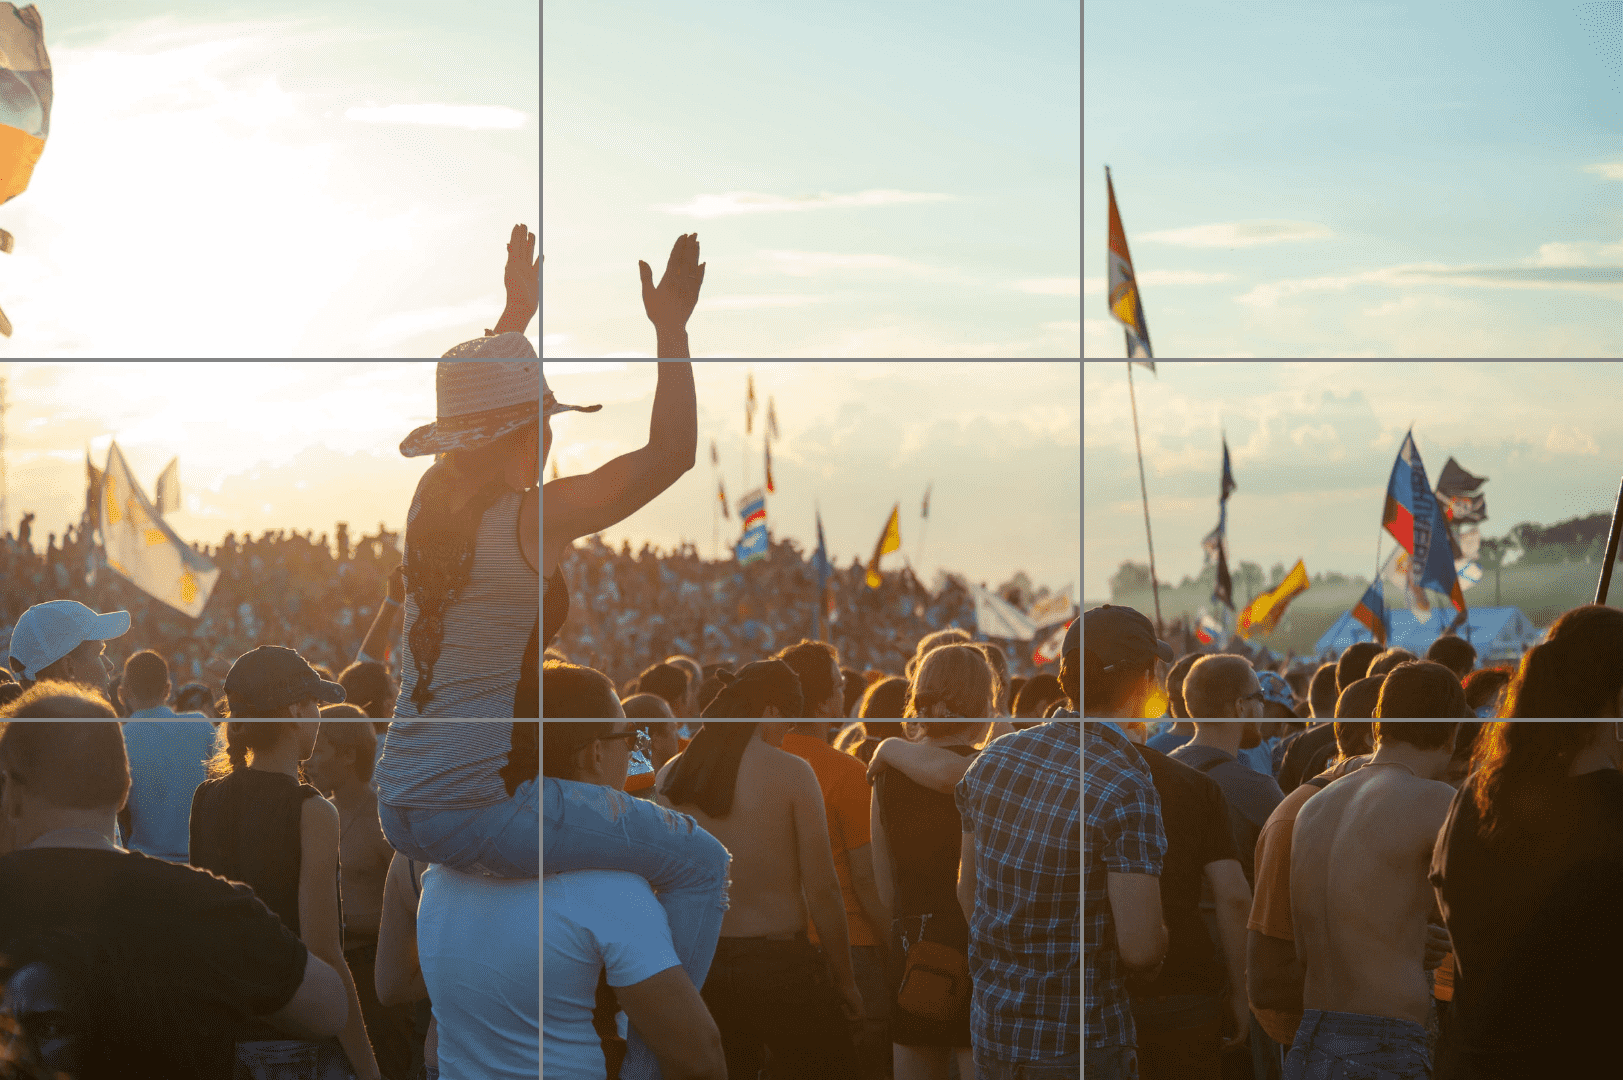 Rule of thirds example of a music festival scene